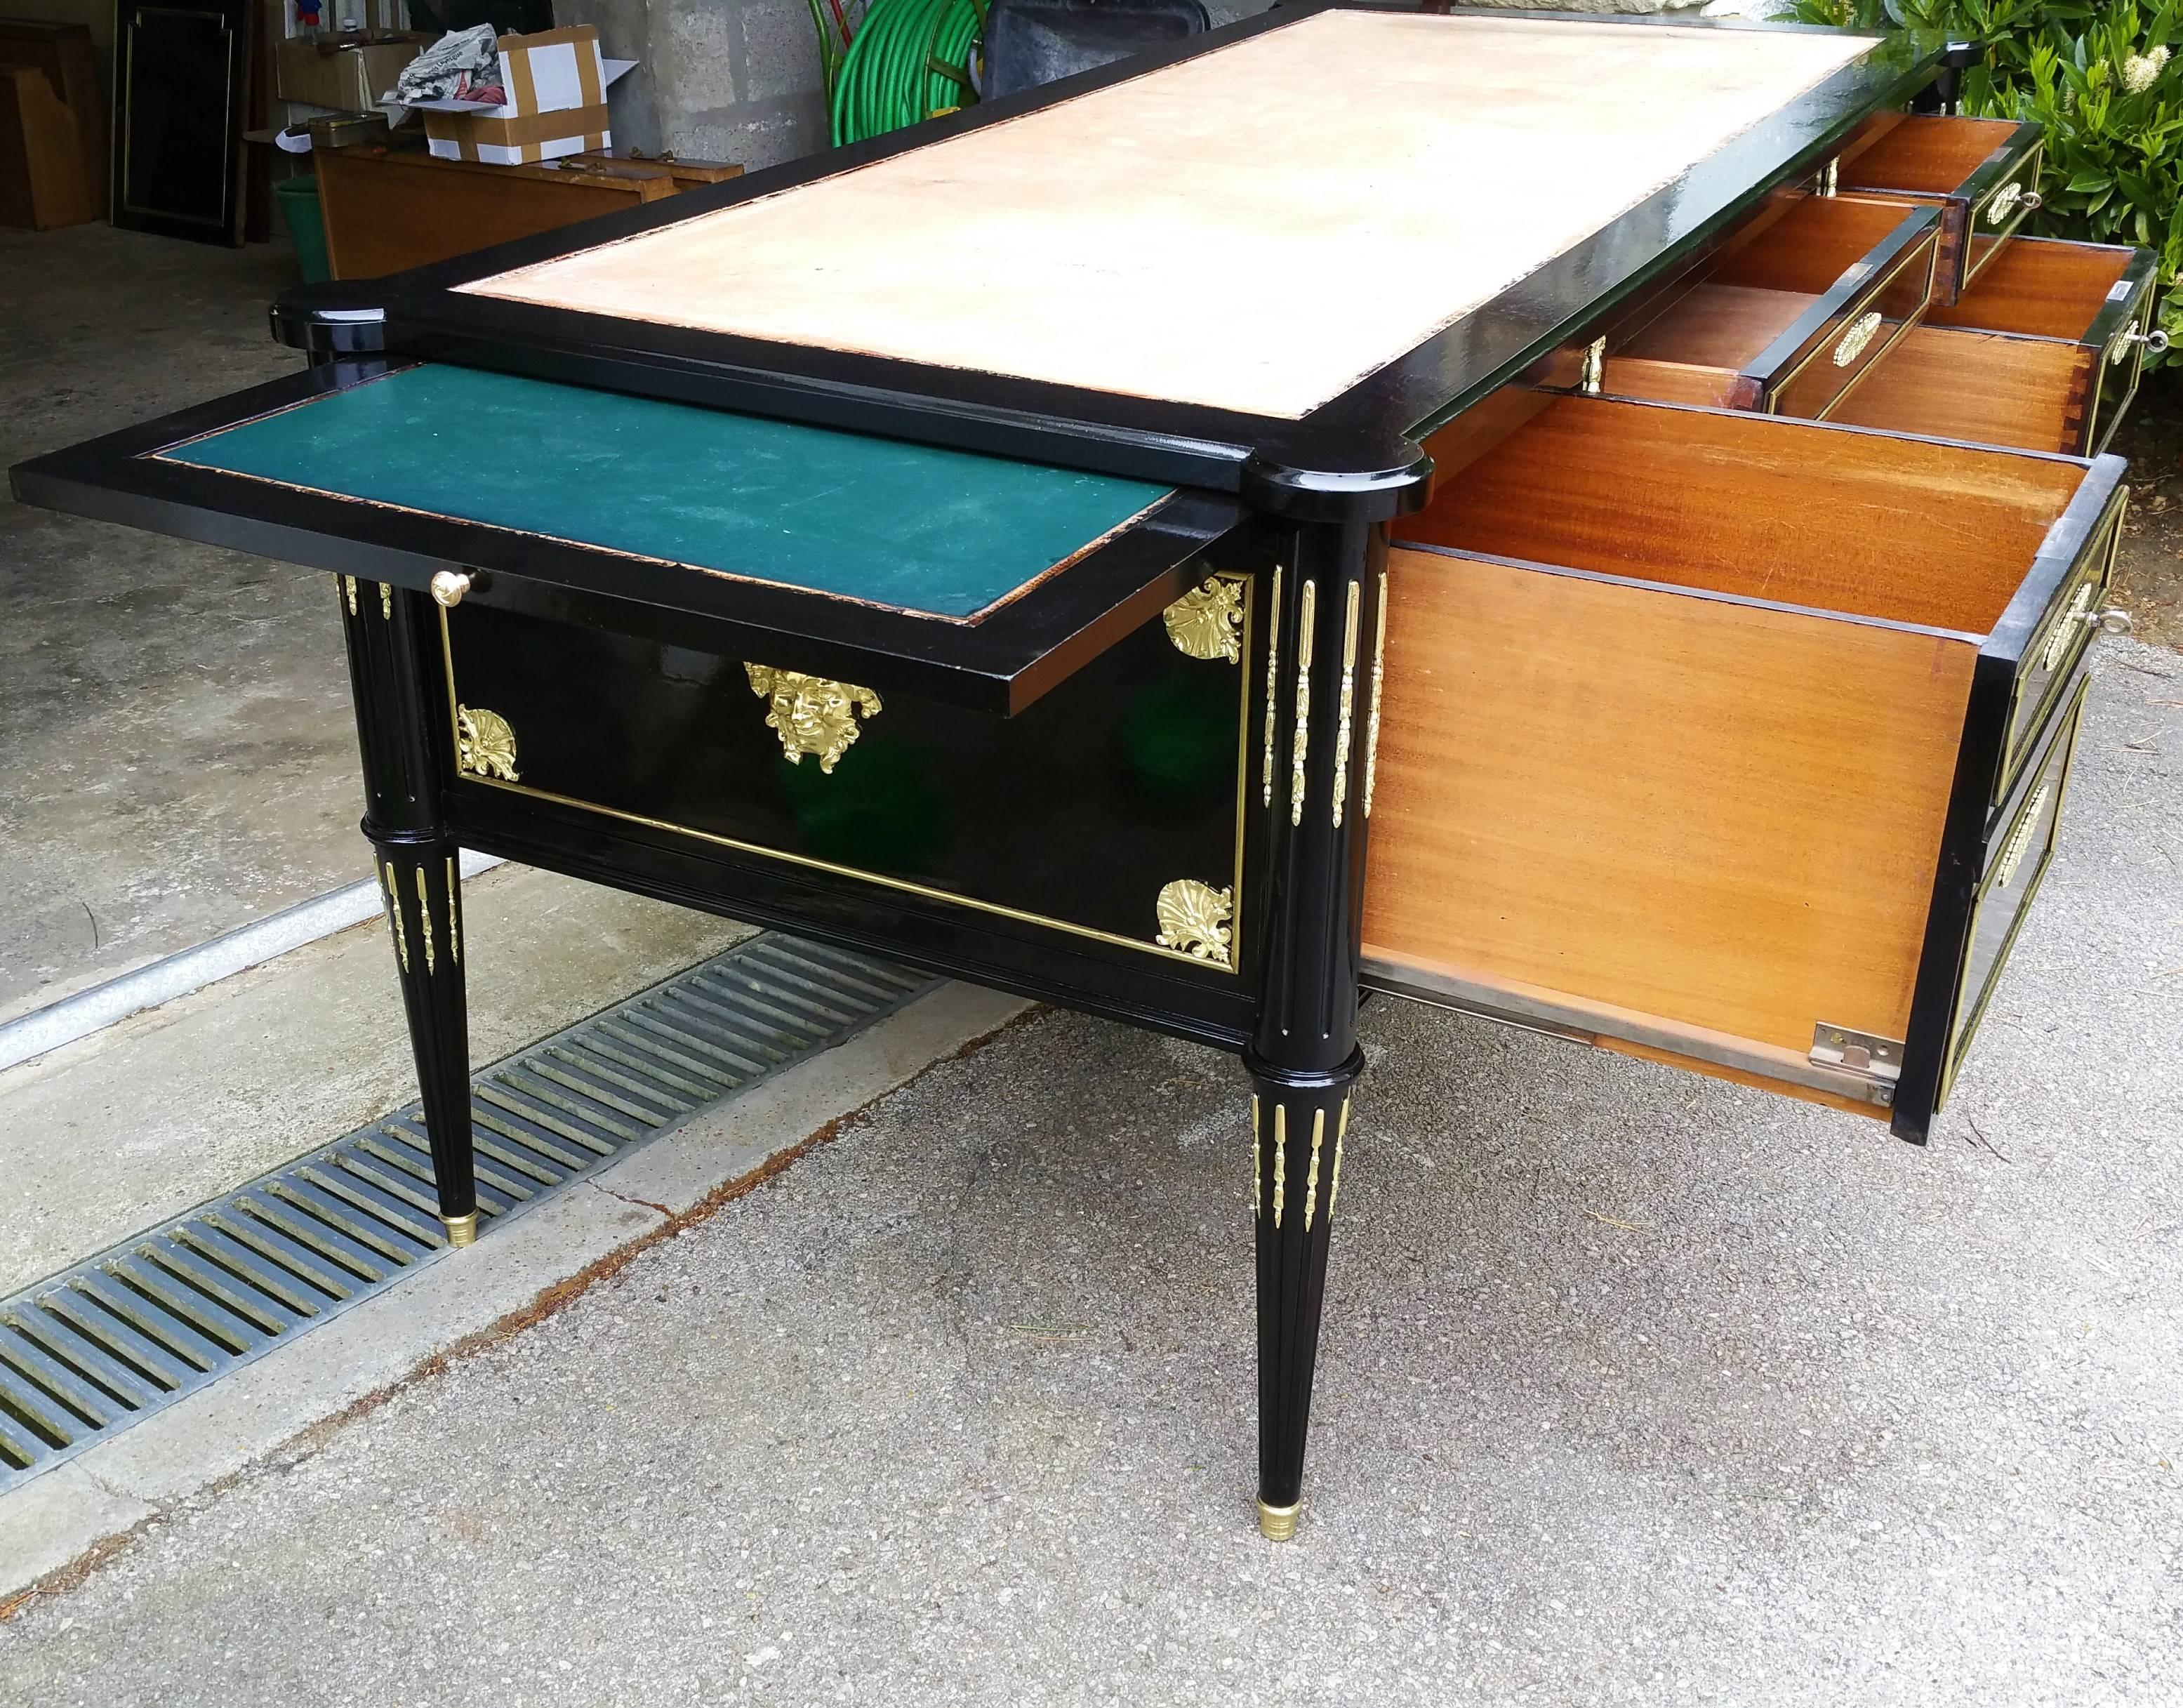 French big size thrree decorated facades table desk Napoleon III style with a rich ornamentation in gilt bronze .
With four drawers The two side facades hide a sliding table for extension making it yet much bigger.
With lock and key.

Dimension: